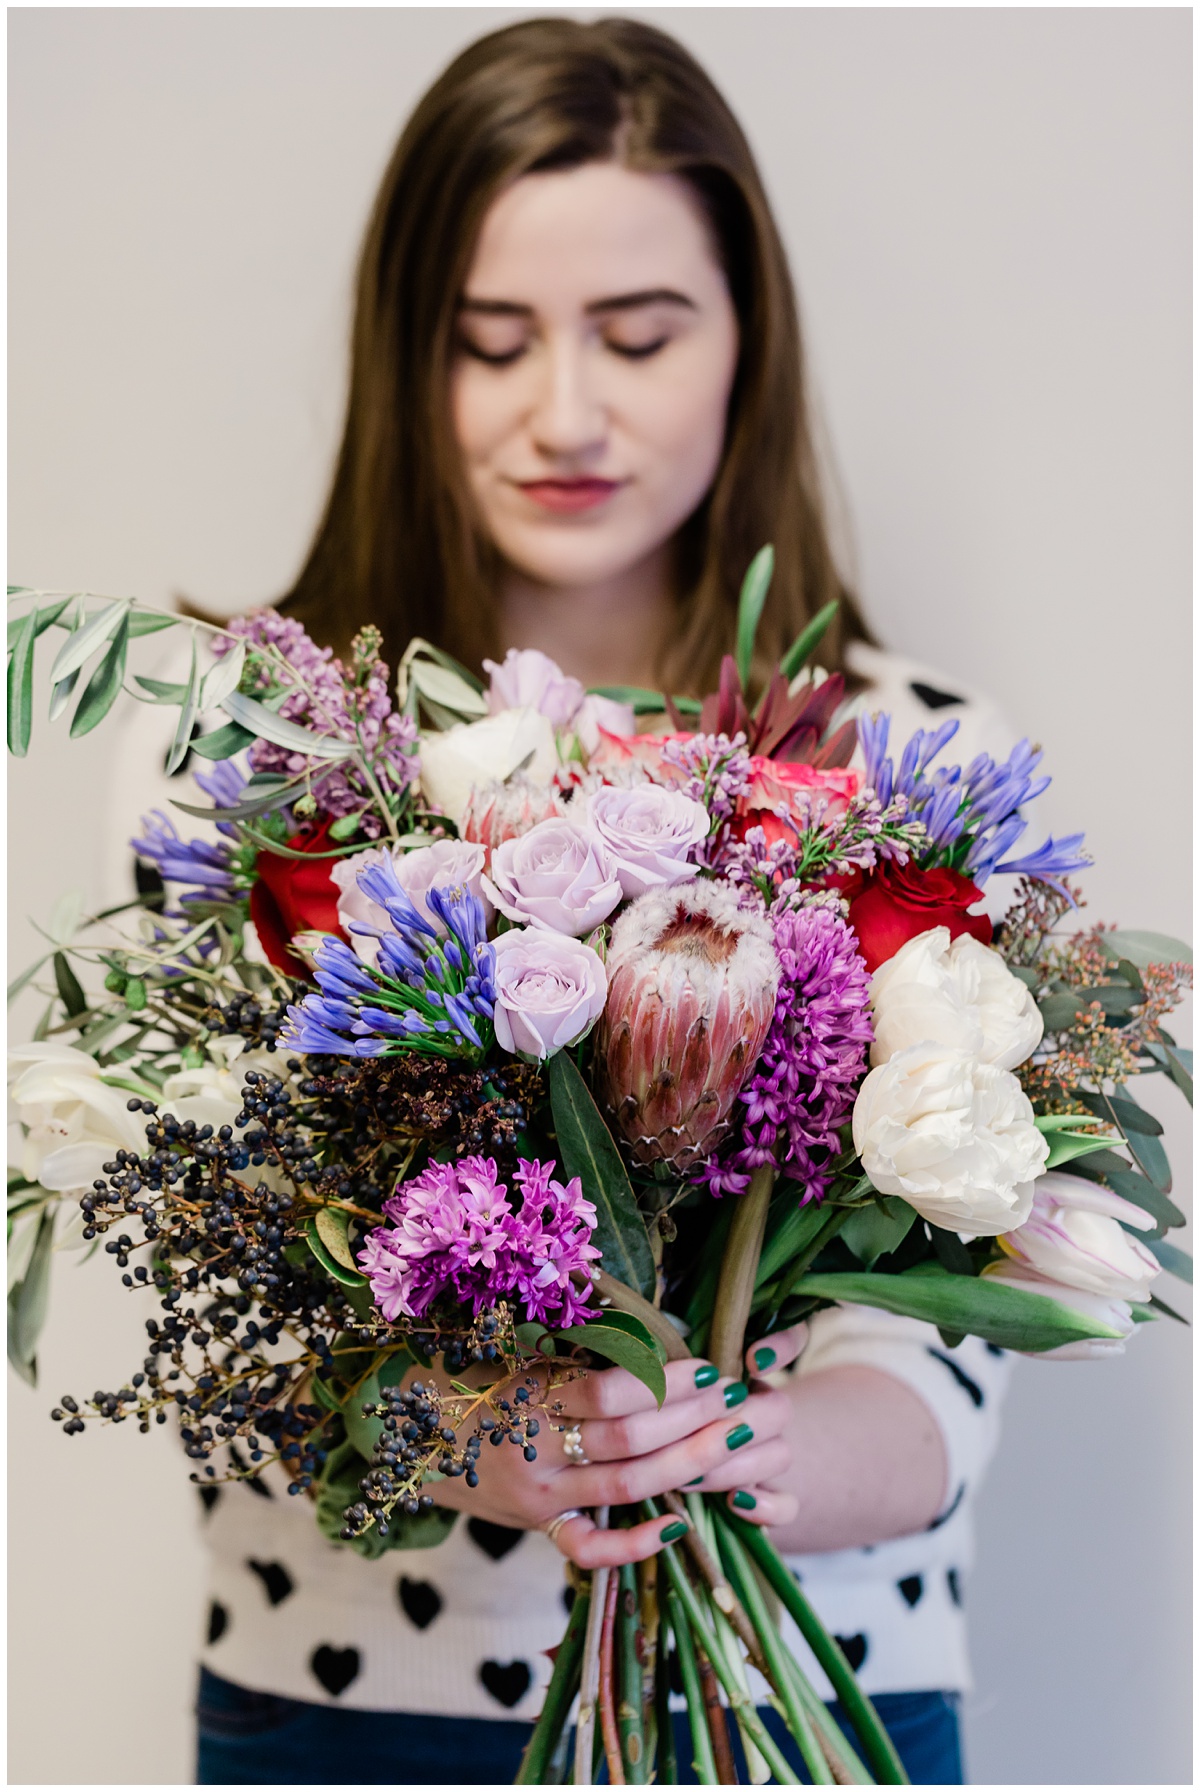 Business branding sessions showing Colorful floral arrangement of deep purples, blues, pinks, creams, and greenery being held by Layla, the owner of Saffron & Grey Floral designs.